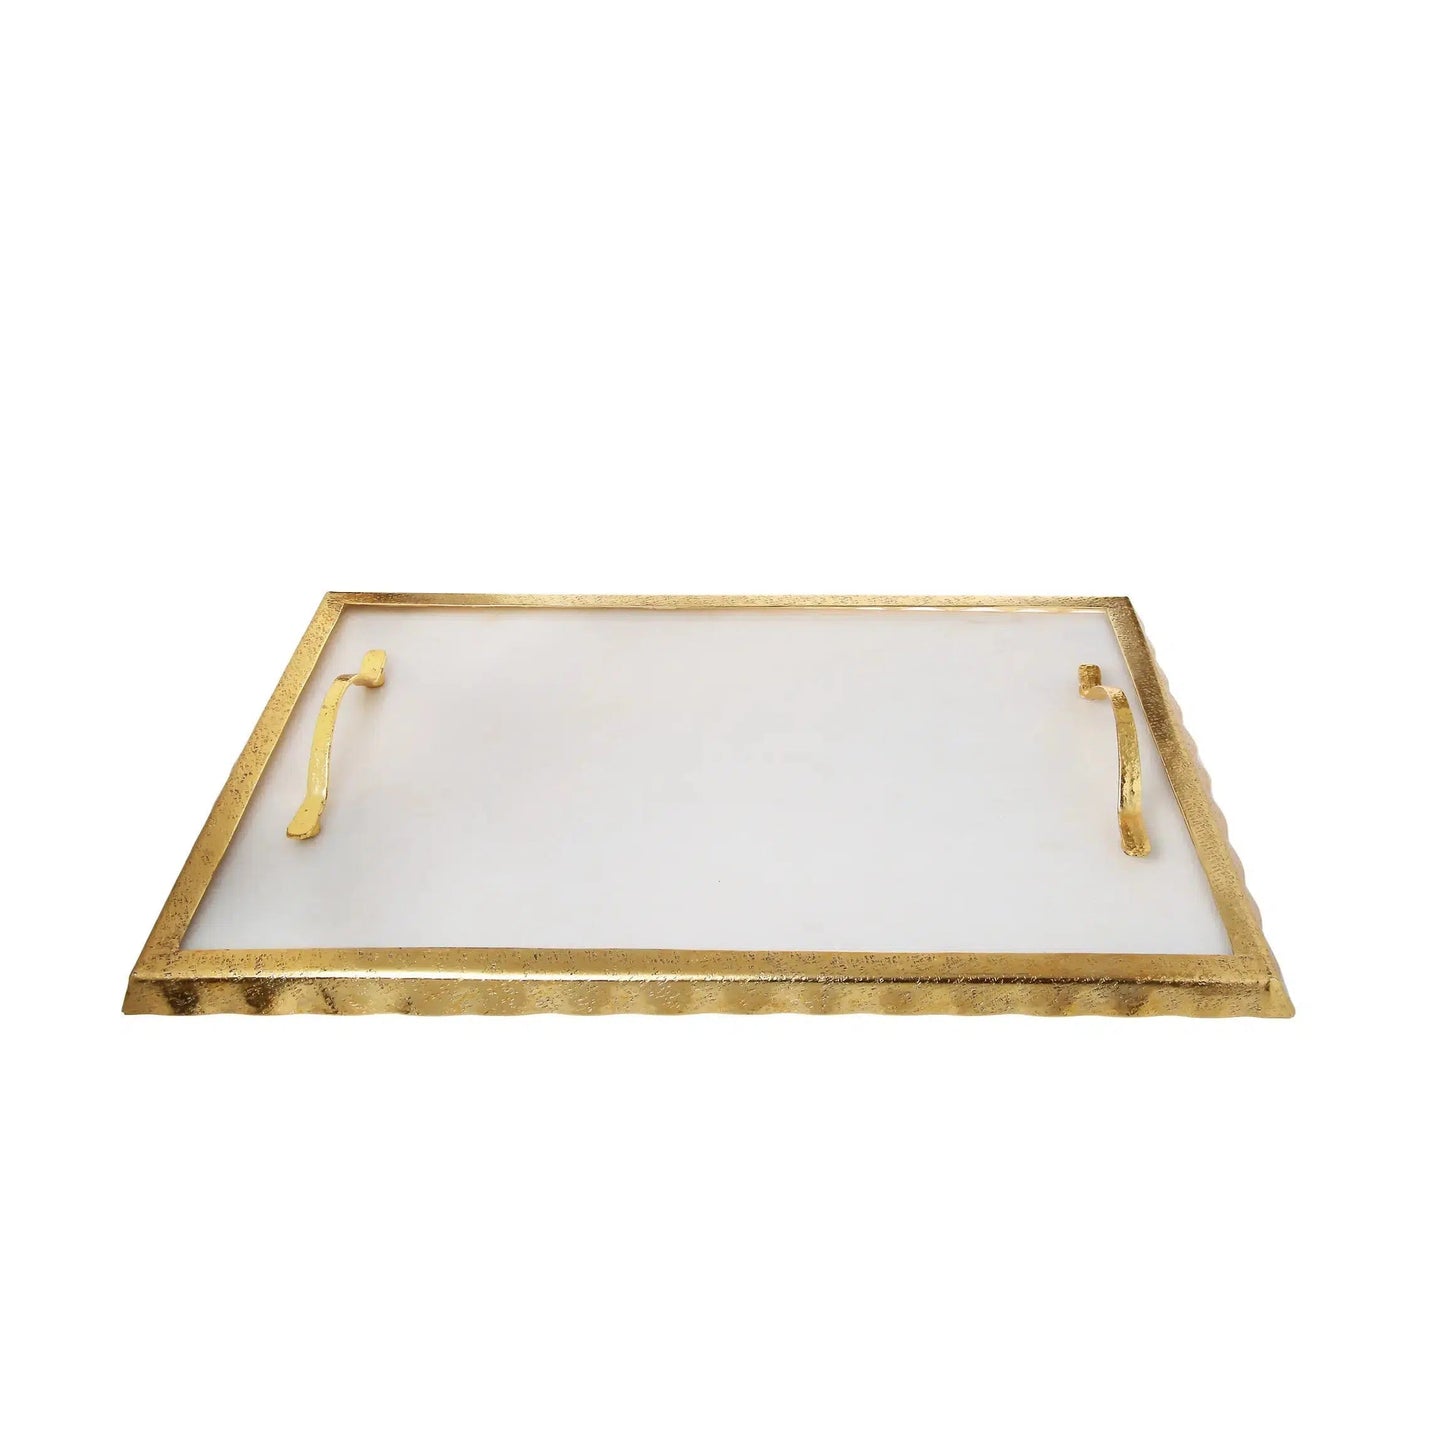 White Marble Tray Gold Wavy Design 17 .25"L X 10.25"W Decorative Trays High Class Touch - Home Decor 